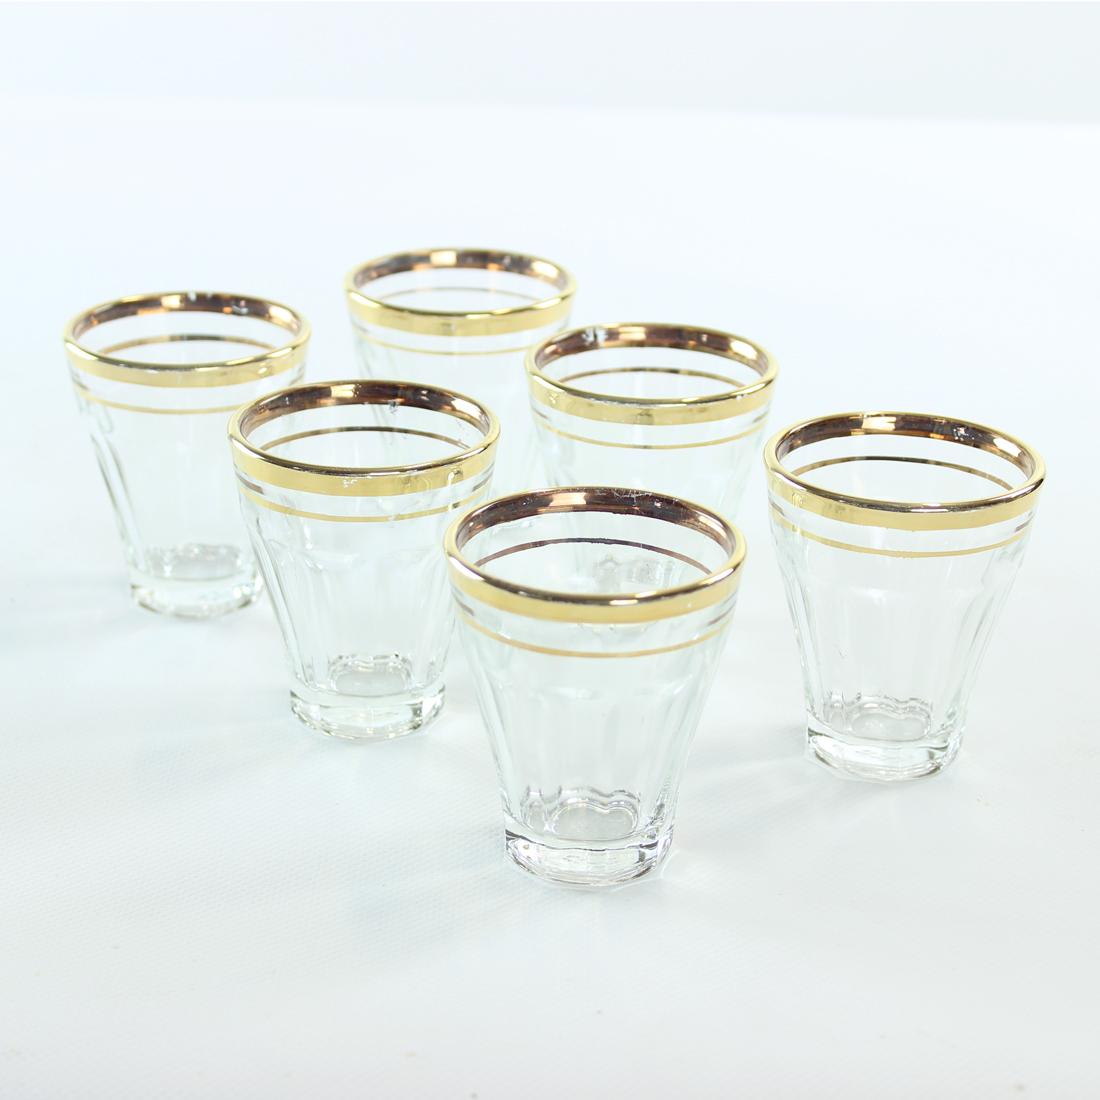 Original and unique set of 6 glasses. Produced in Czechoslovakia in 1960s. The glasses are made out of pressed glass with in pure clear glass. The rim is decorated with gold and handpainted on the glass. Originally this rim was made in a true gold.